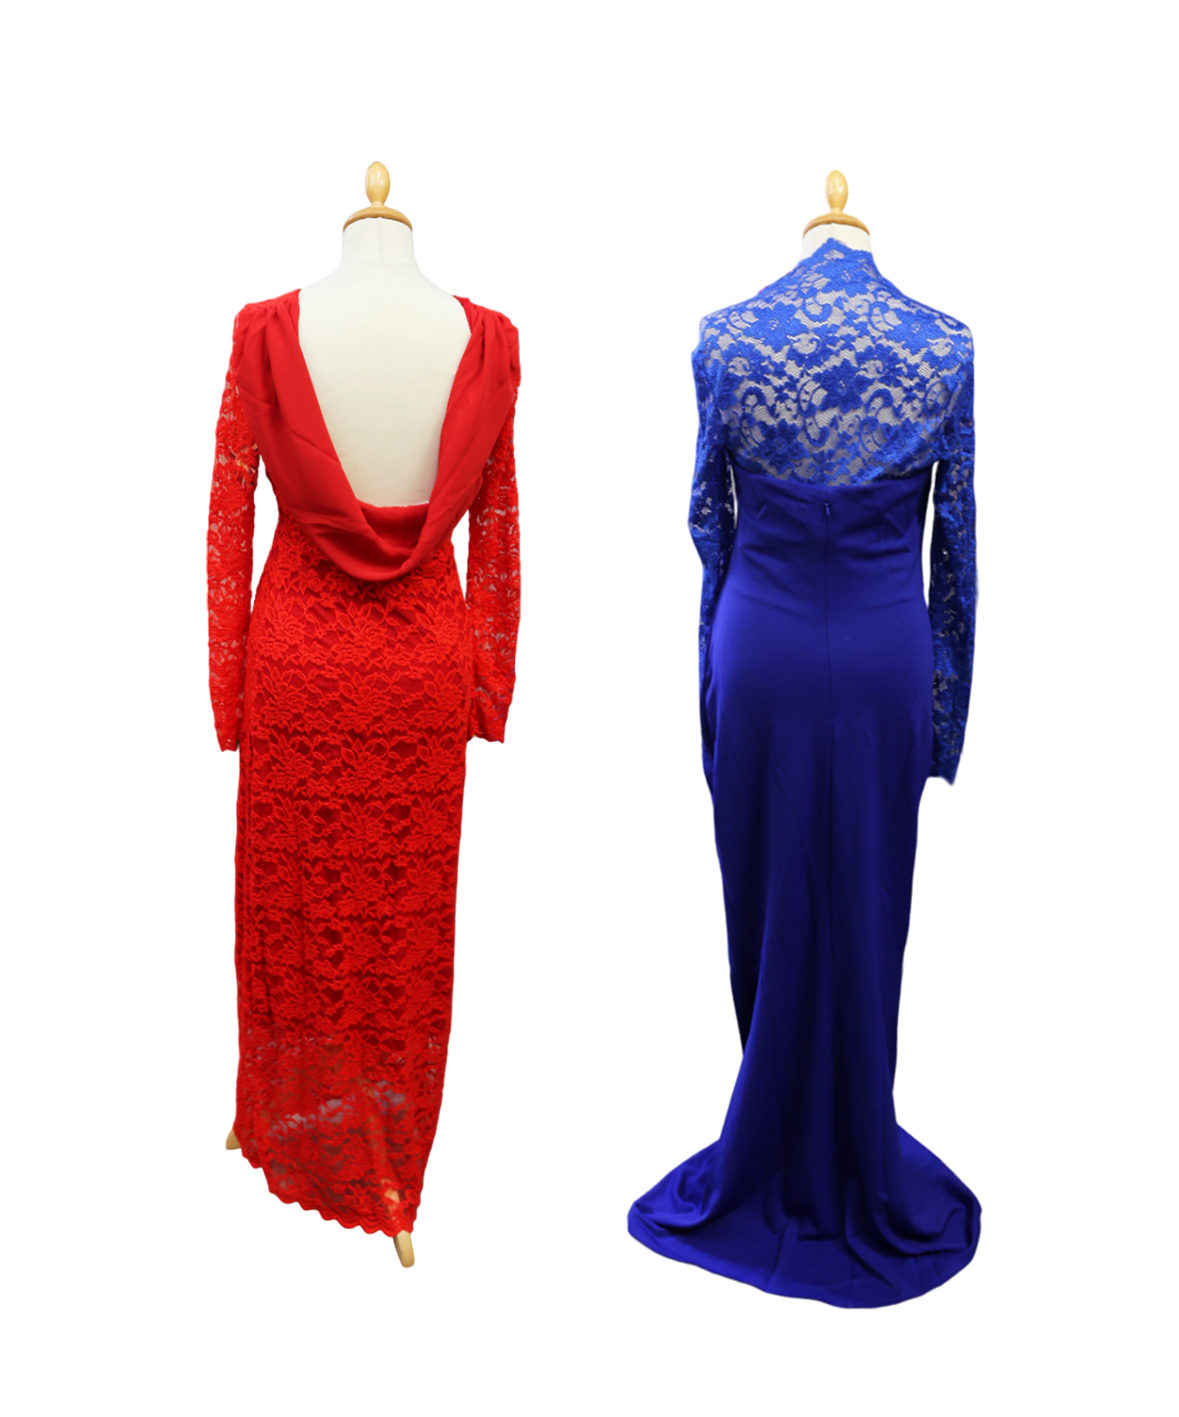 6 Lili London postbox red dresses, 1 x size size 8, 2 x size 10, 2 x size 12 and 1 x size 14, - Image 2 of 6